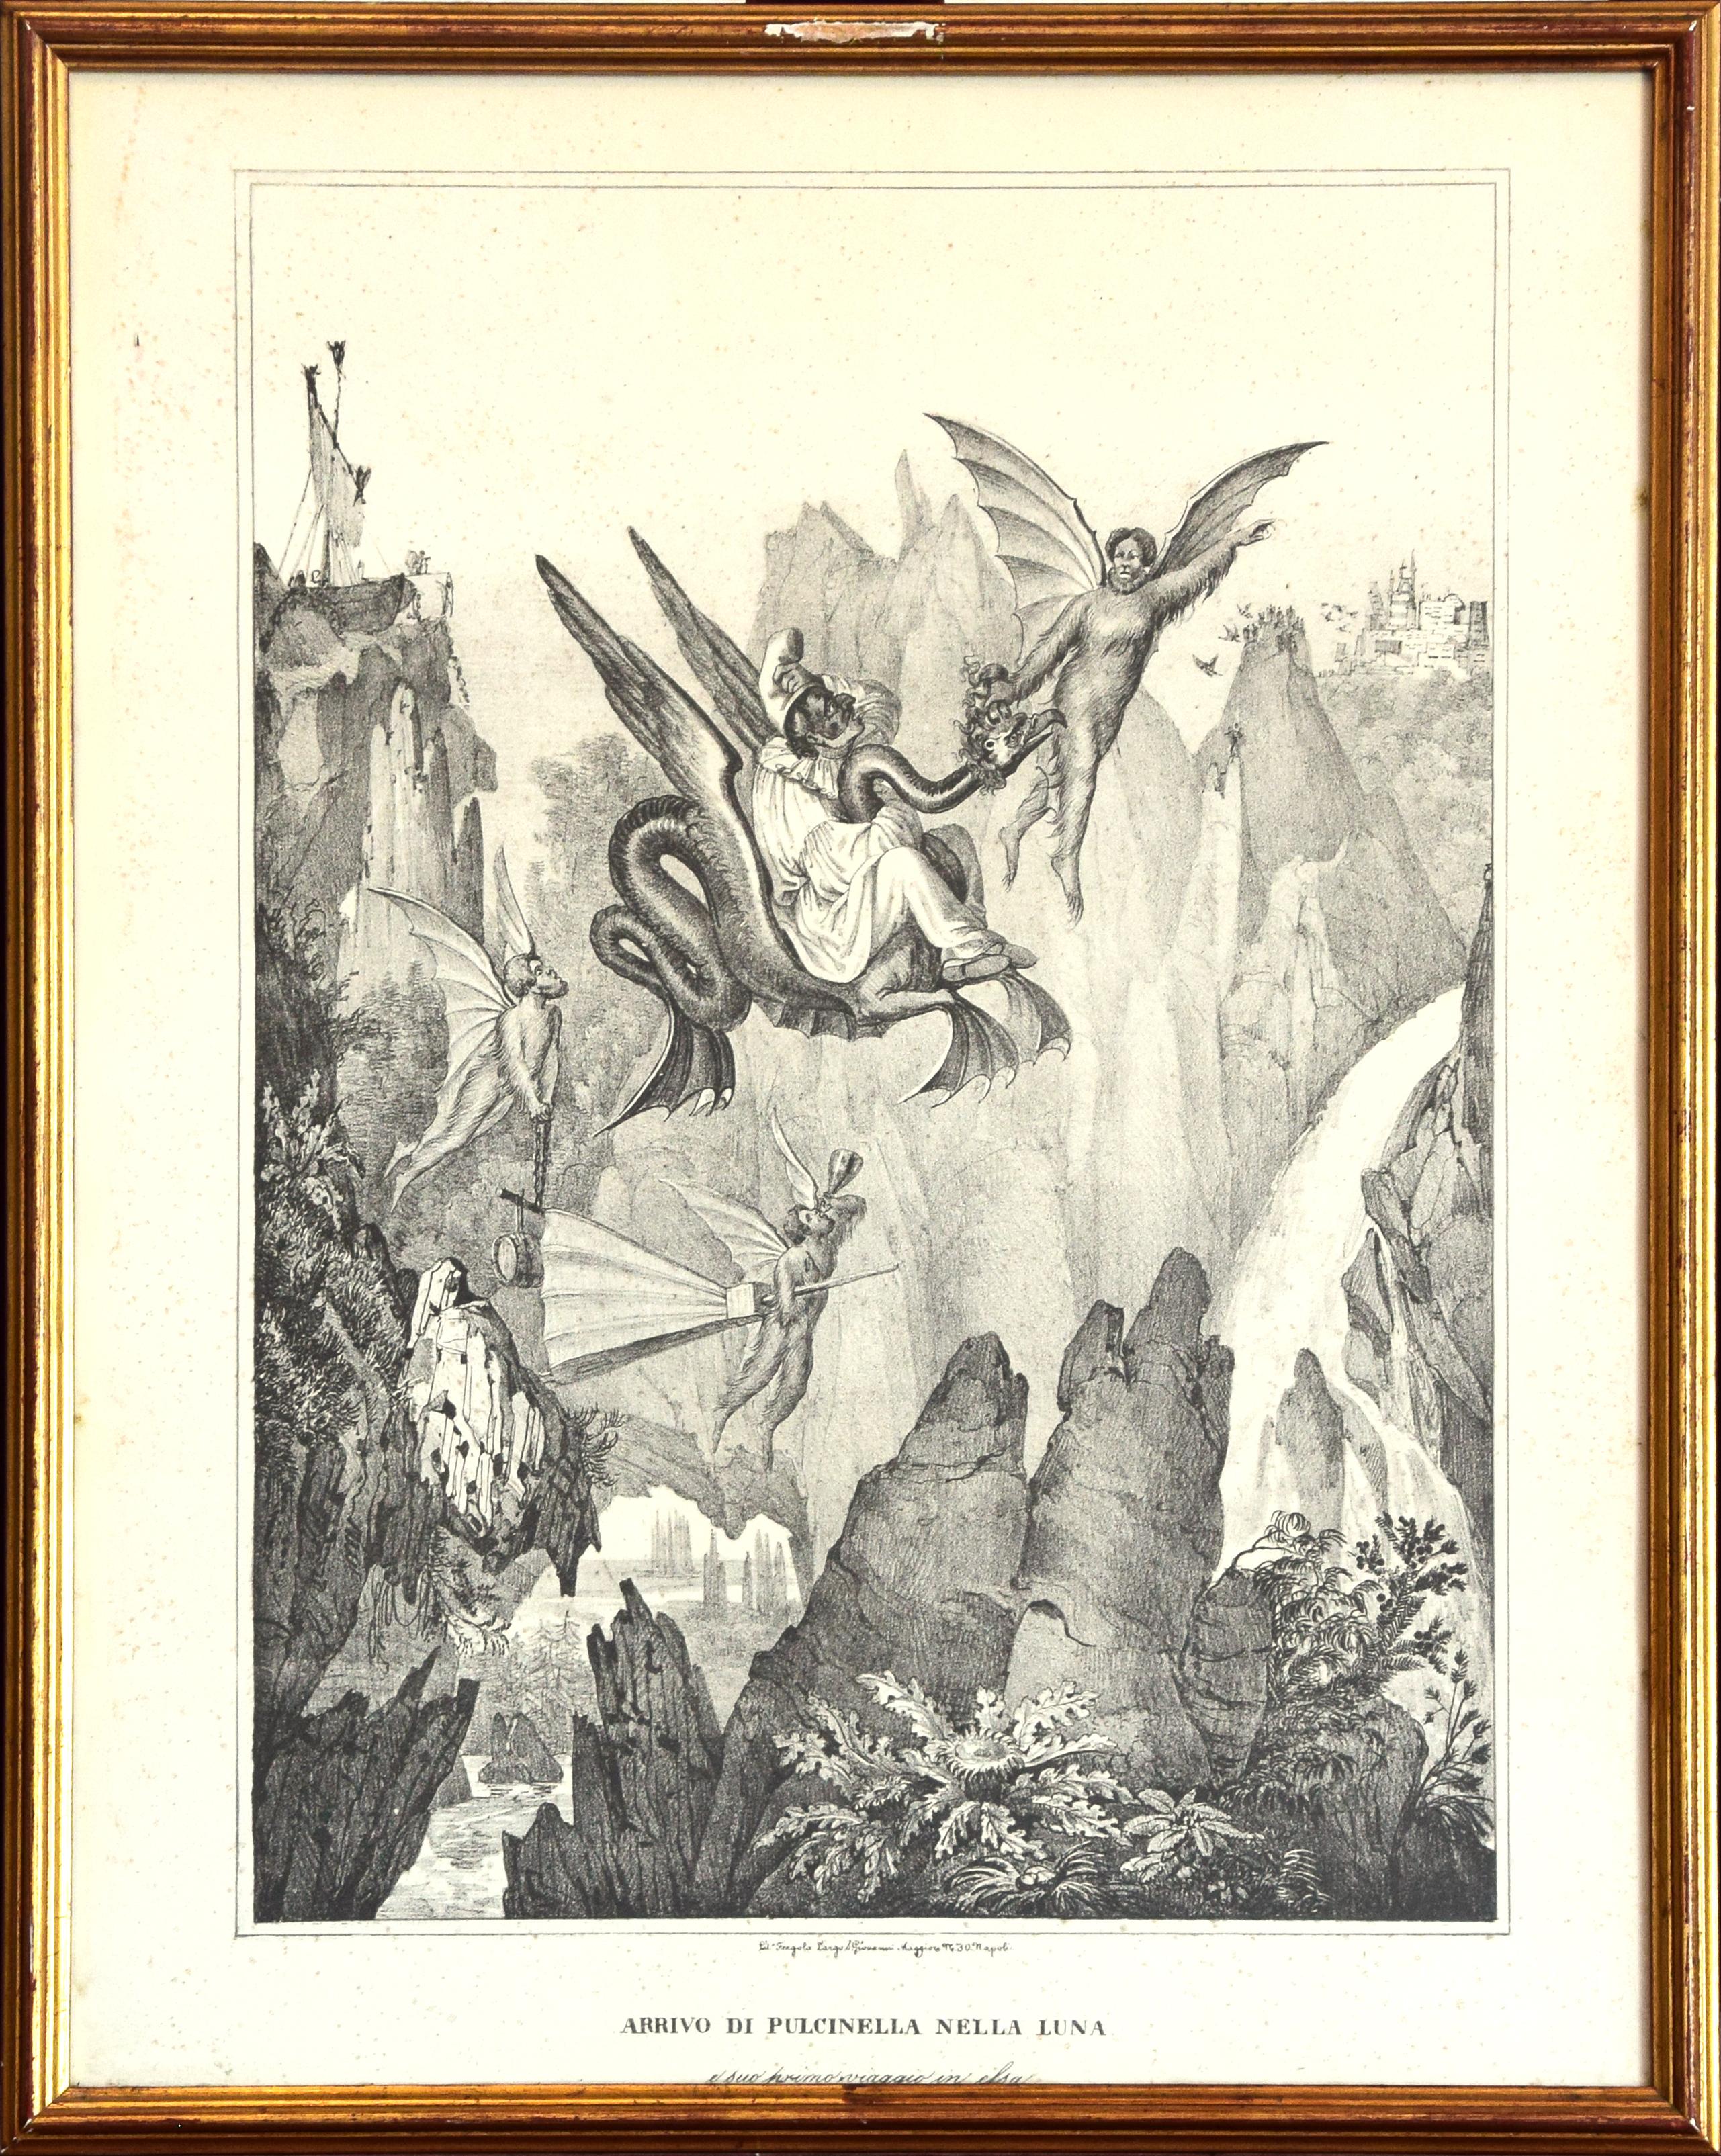 Arrival Of Pulcinella On The Moon is an original lithograph made by Gaetano Dura.

Title on the lower center. Published by Lithography Fergola, Naples (printed on lower center). XX century. On lower right is printed: Museo Aeronautico Caproni